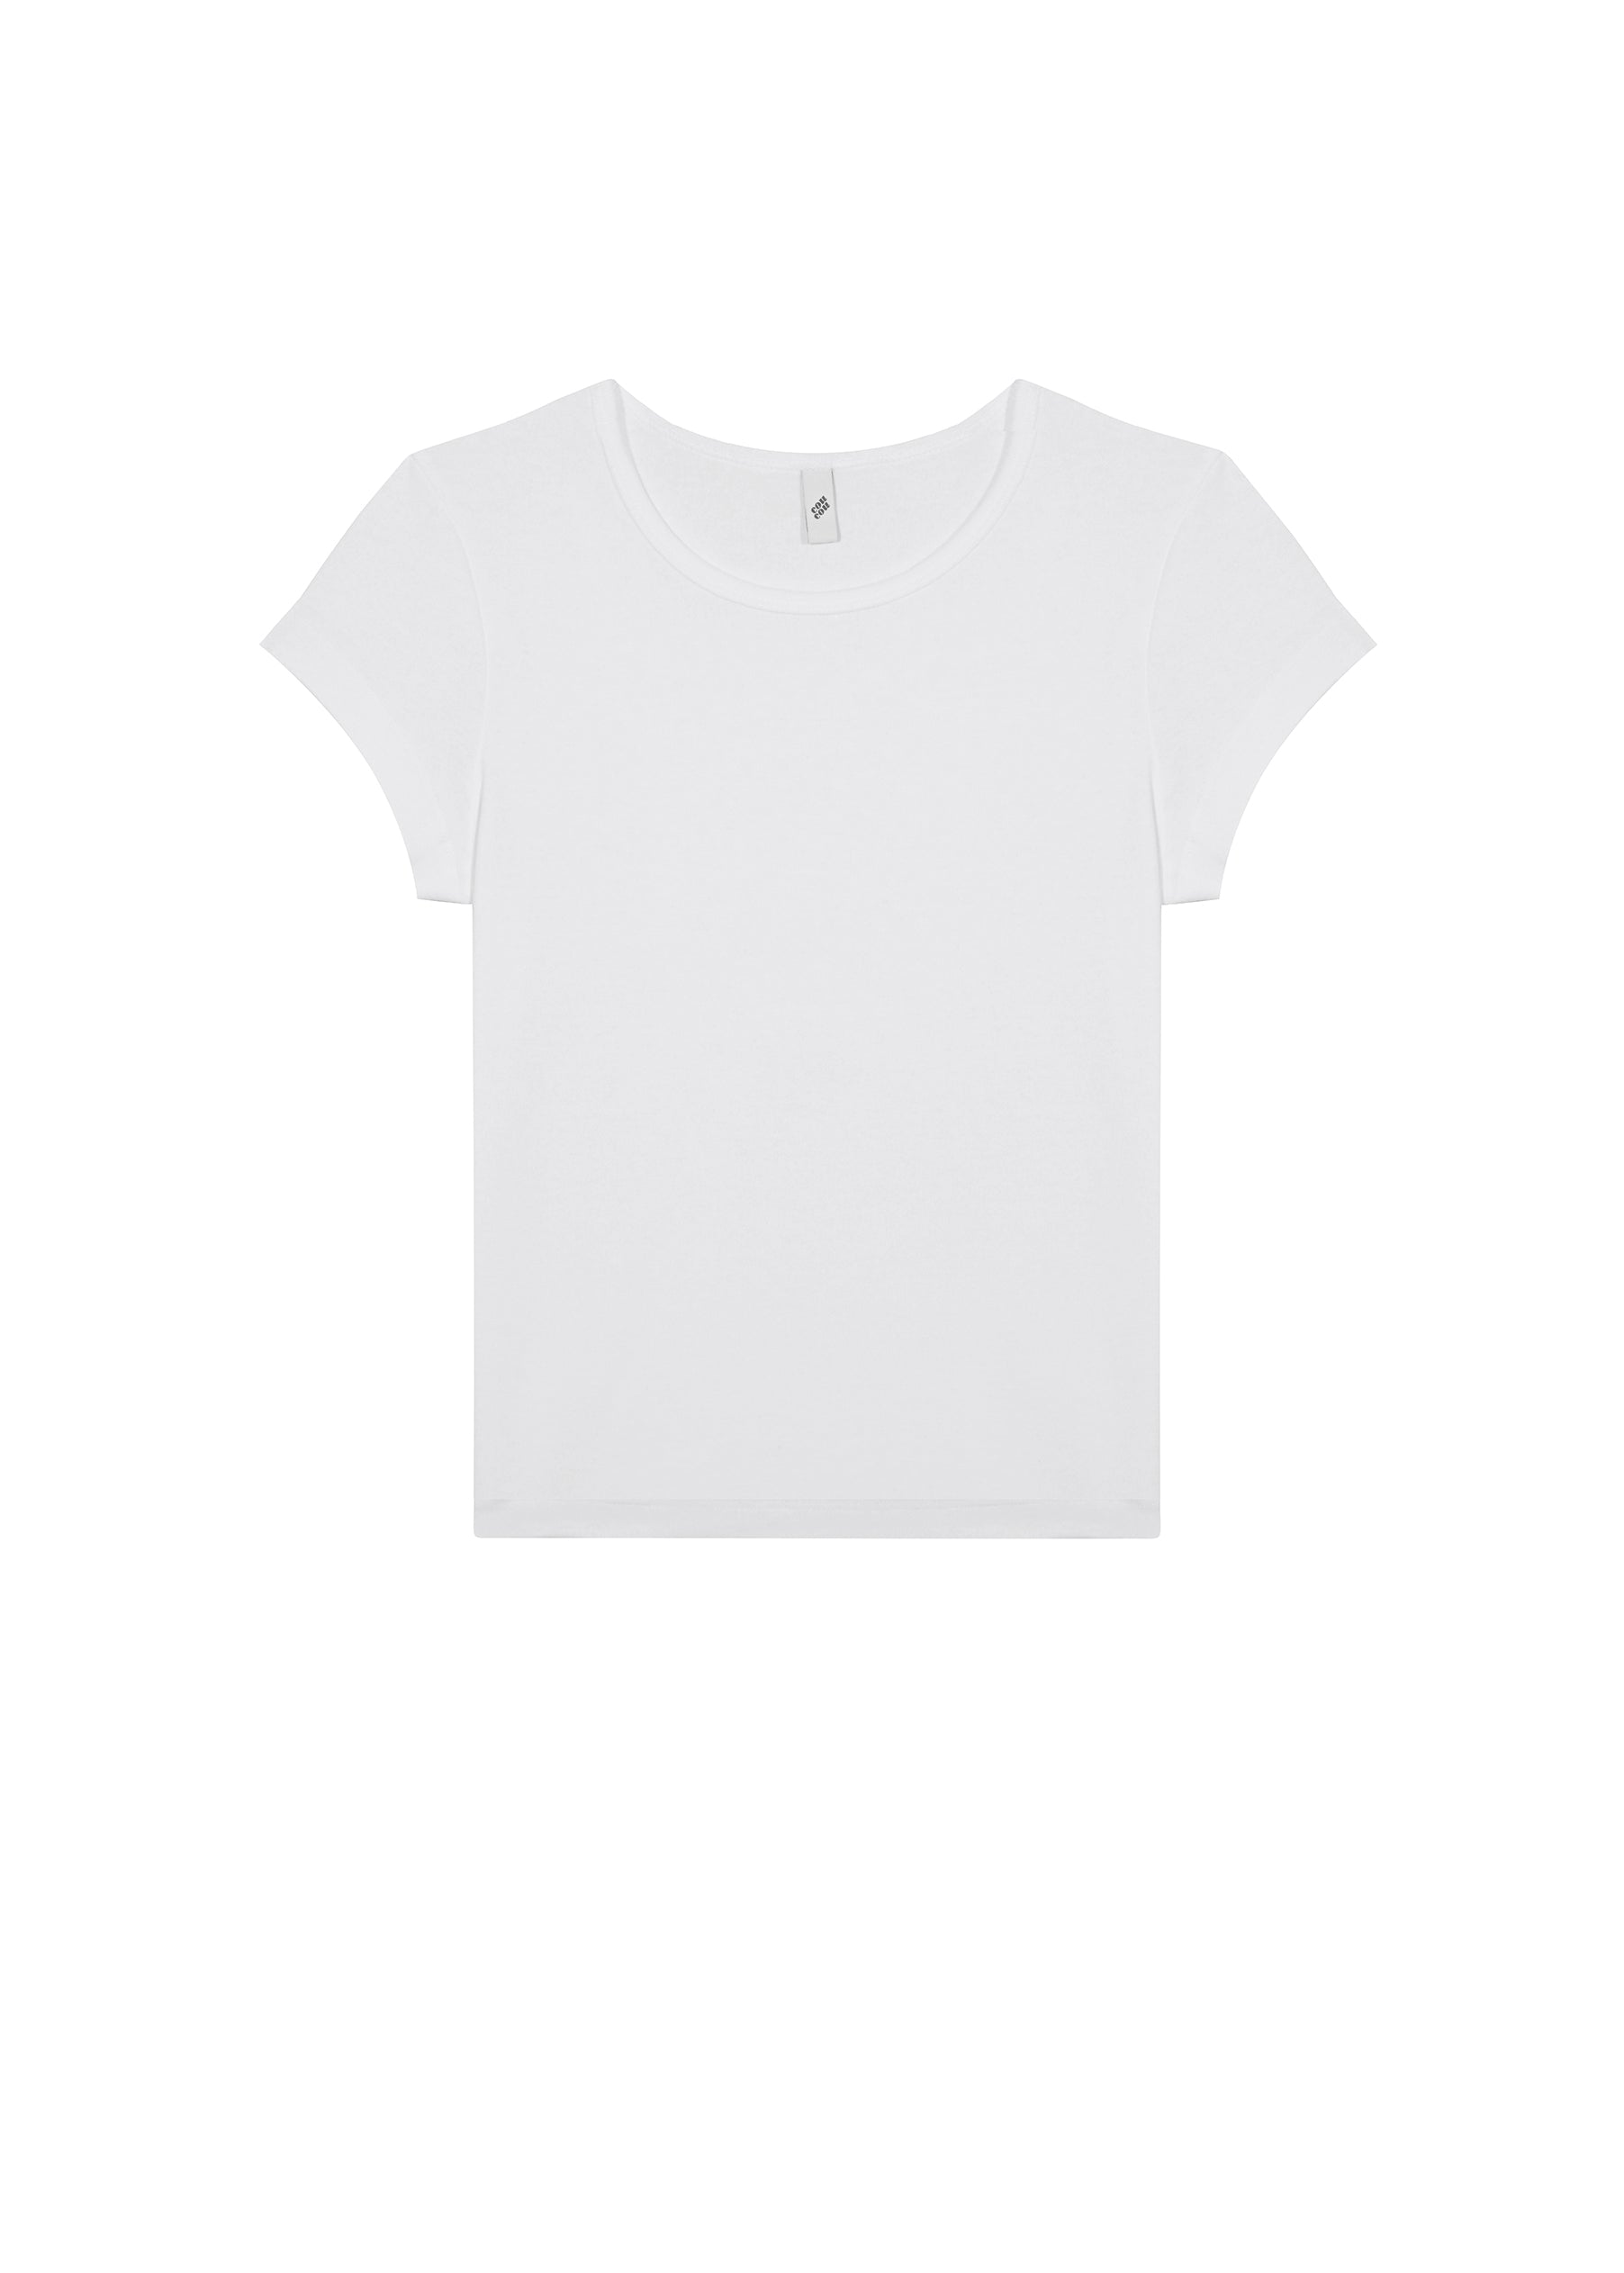 The Baby Tee: Cotton Jersey White